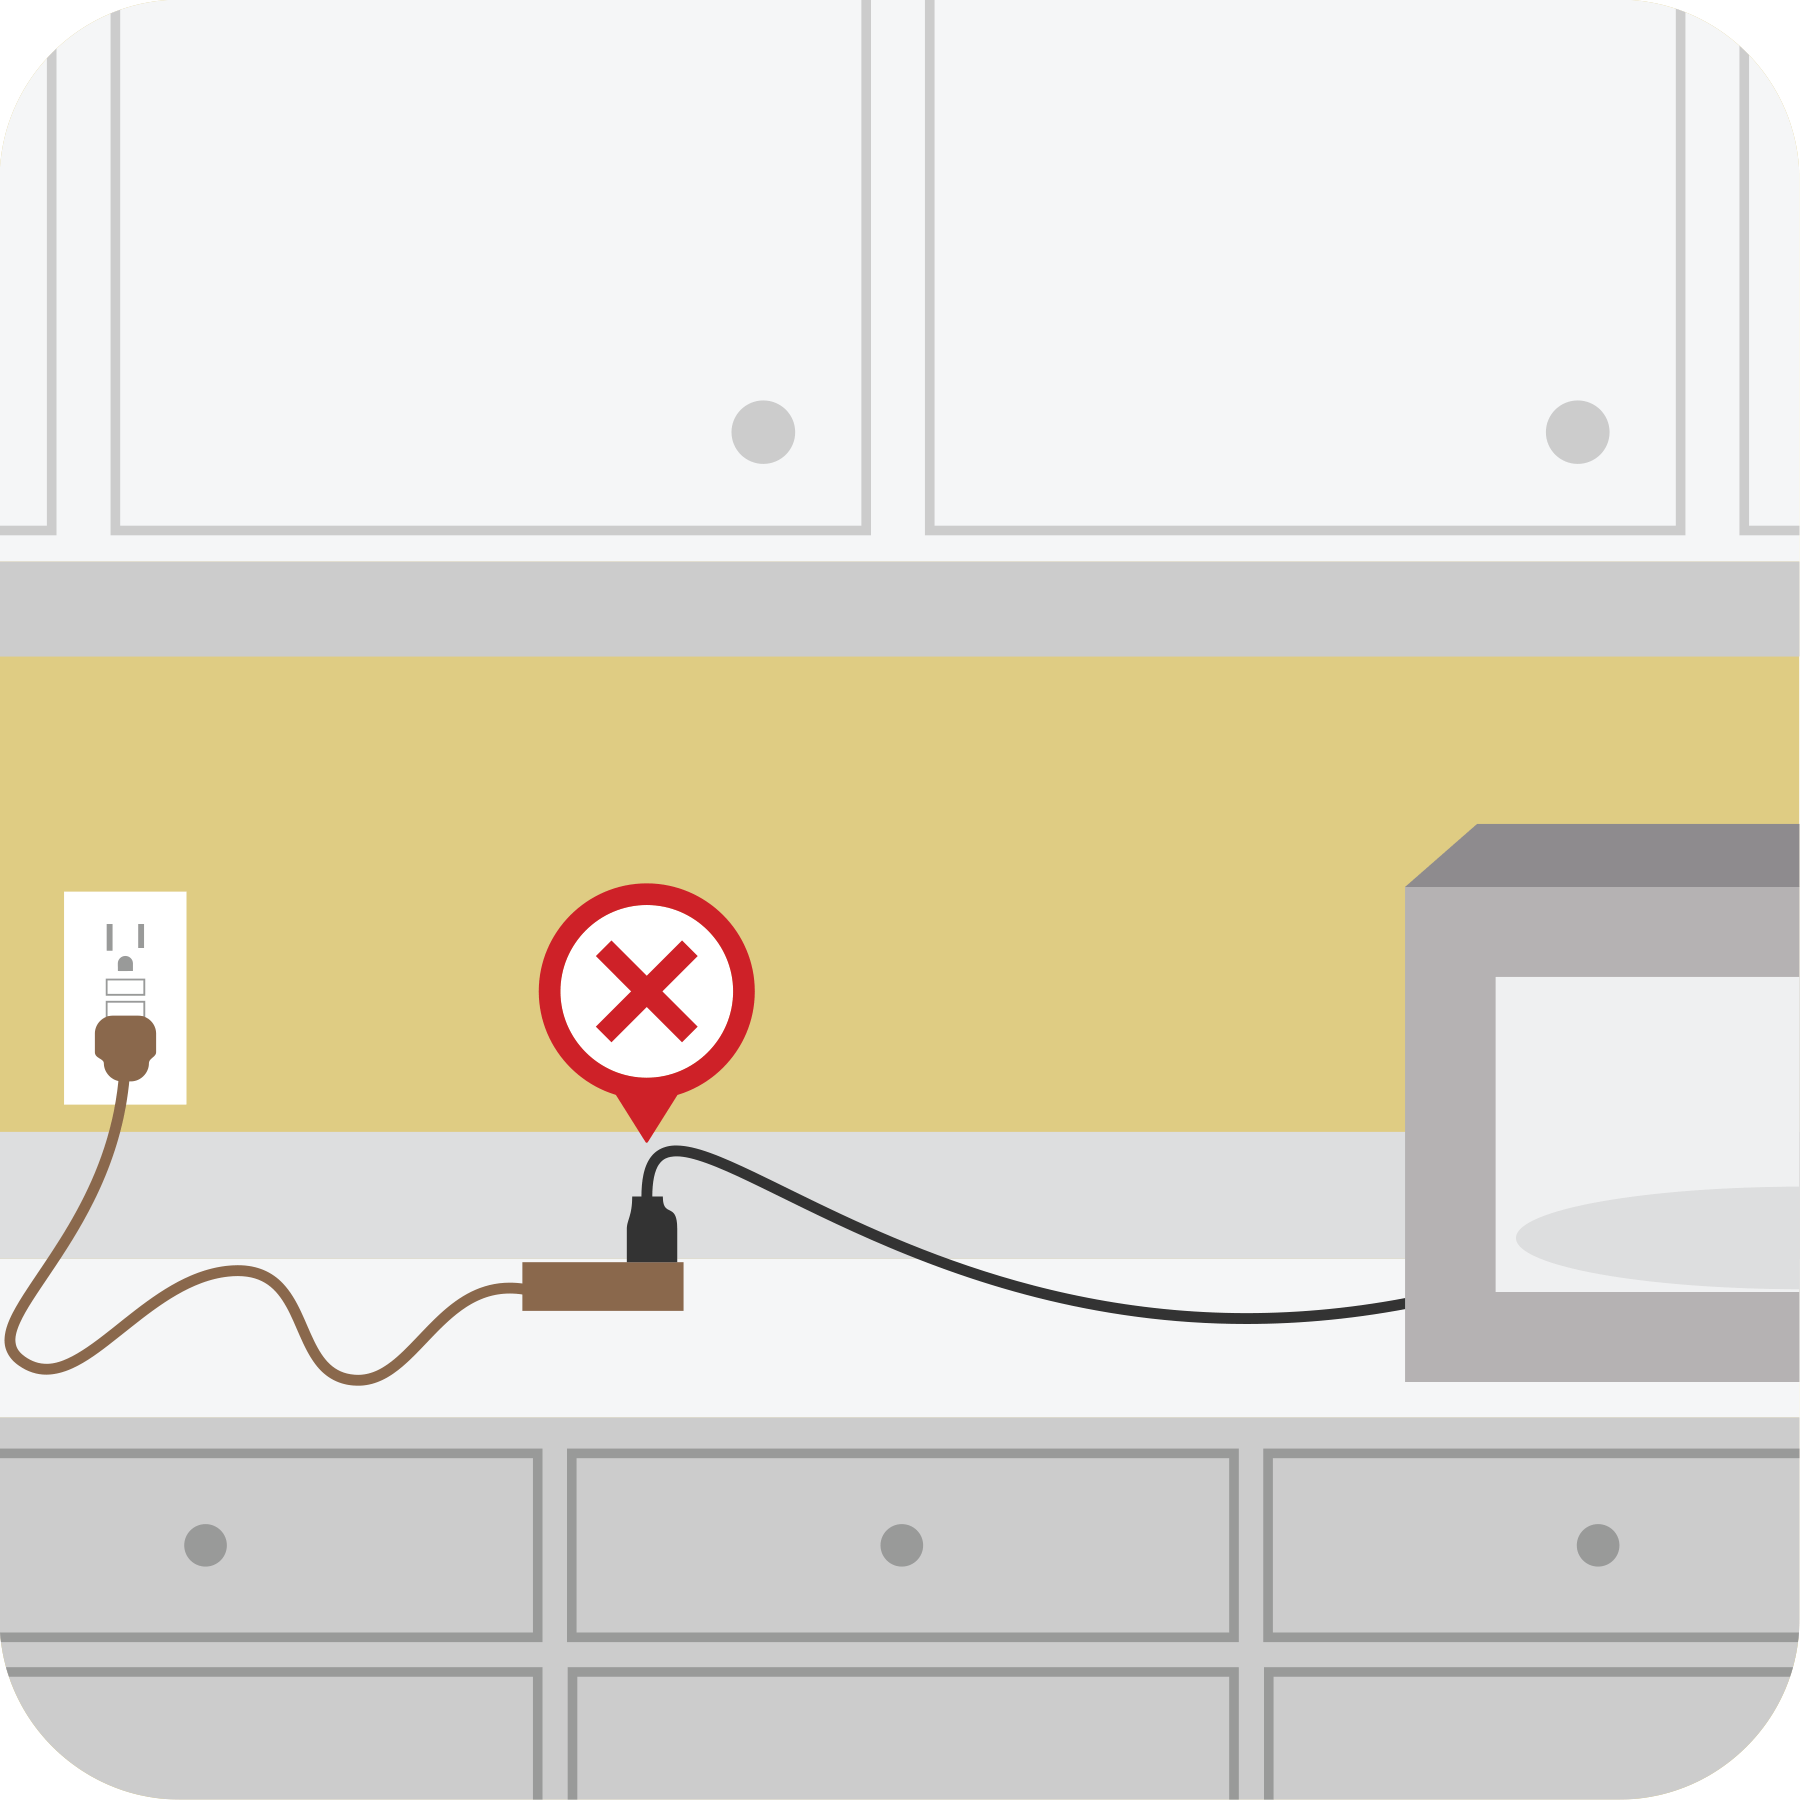 Microwave oven plugged into extension cord with a red x to indicate it is wrong.